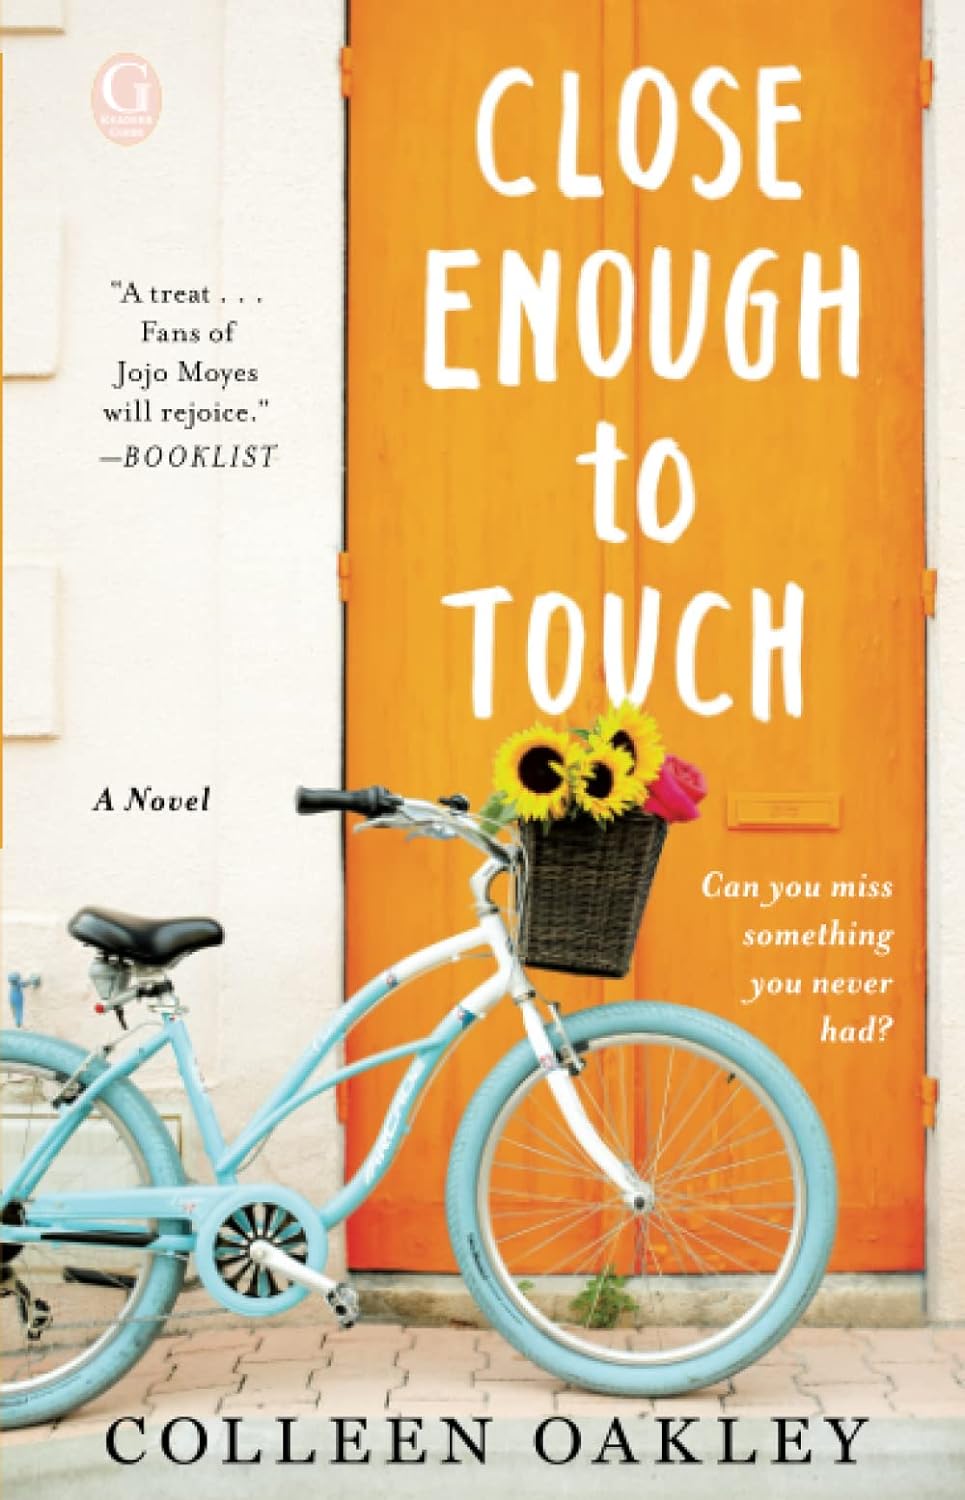 Book cover shows a bike with flowers in the basket, parked in front of a door